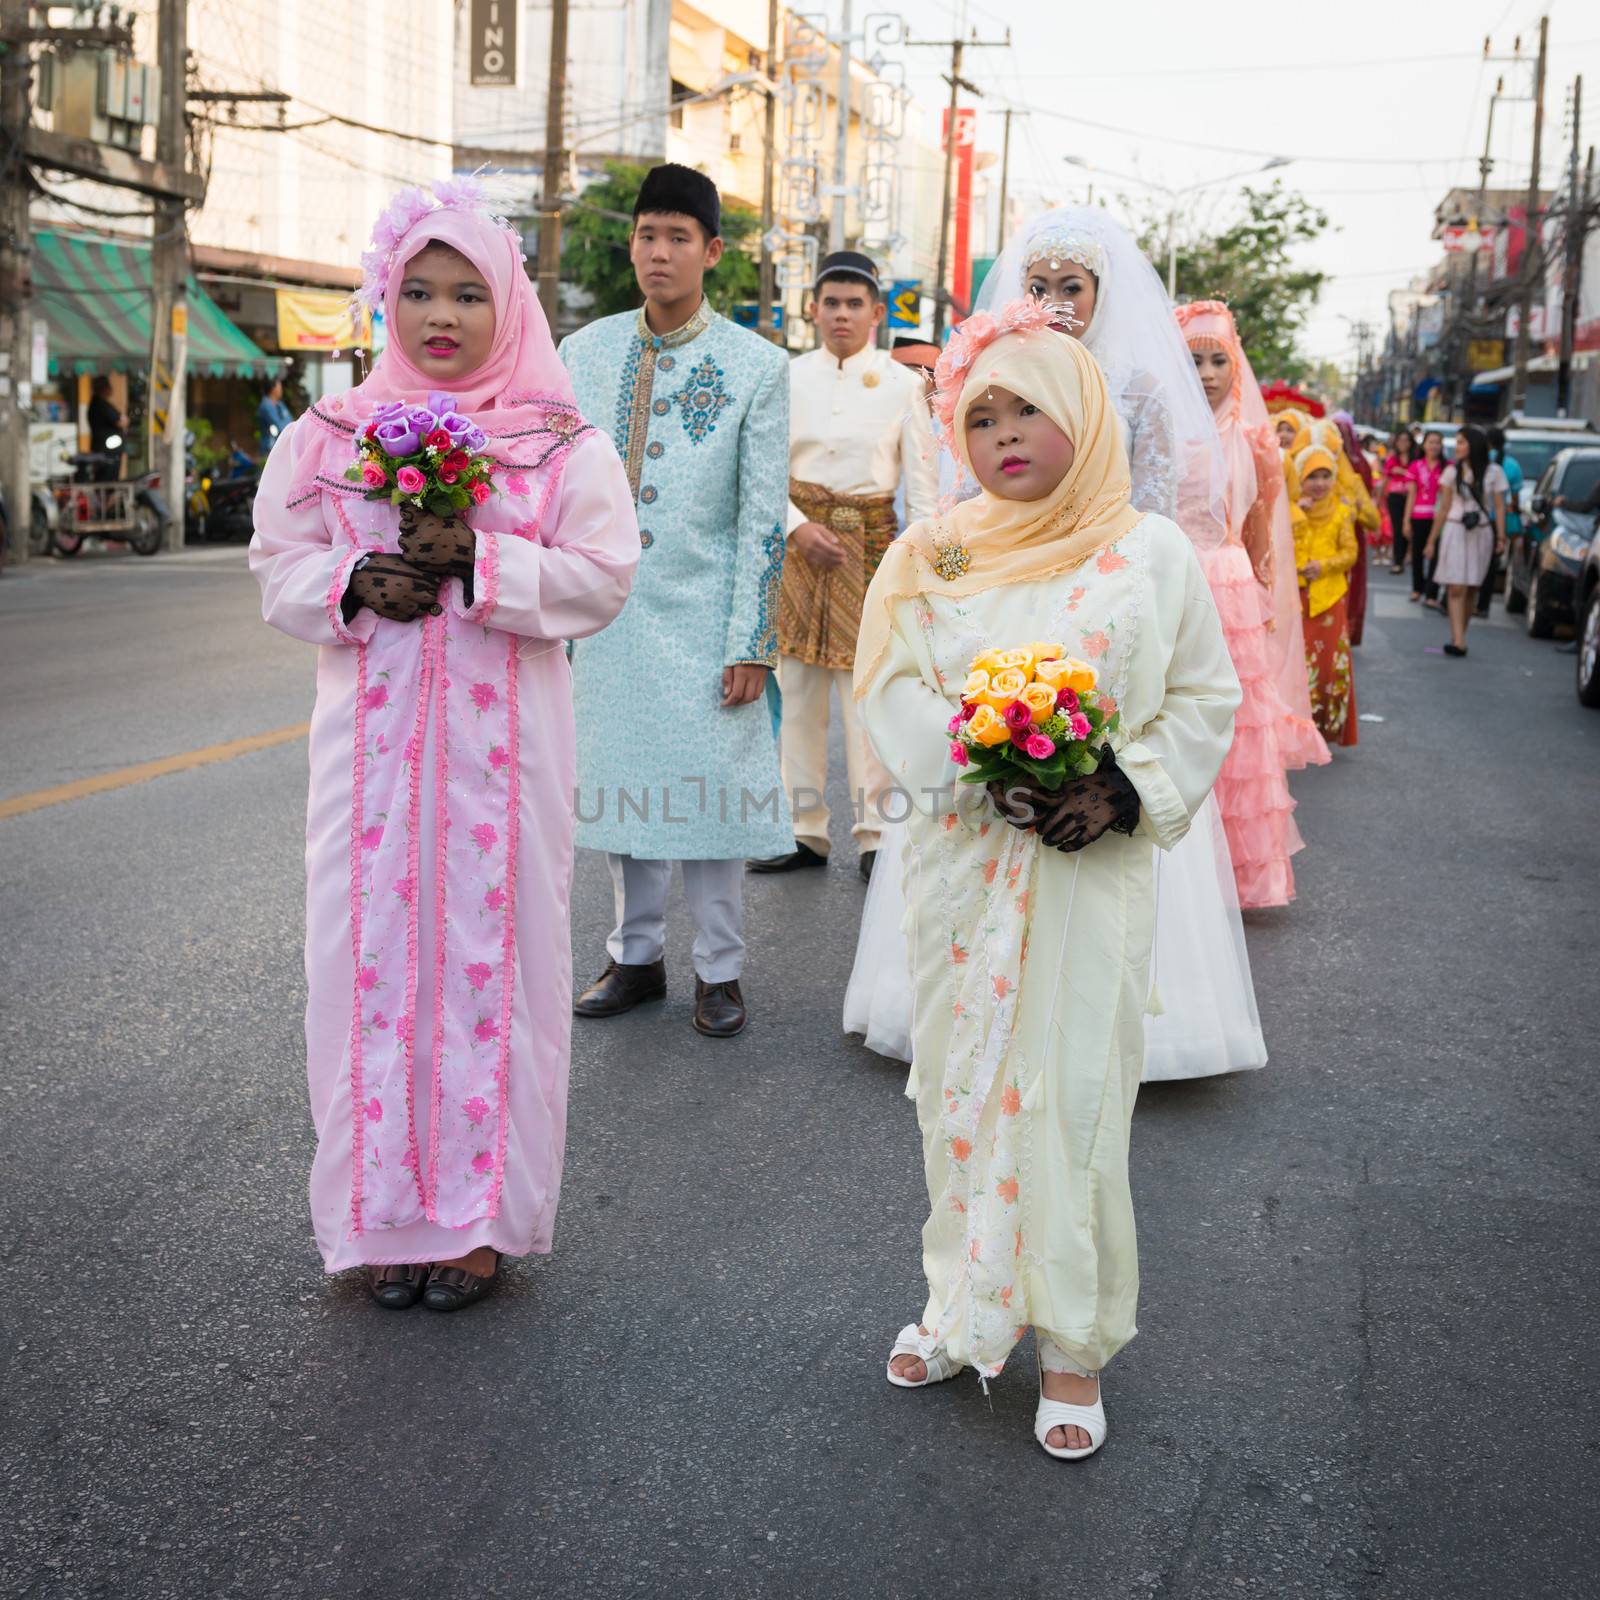 PHUKET, THAILAND - 07 FEB 2014: Phuket town residents  in wedding dress take part in procession parade of annual old Phuket town festival. 